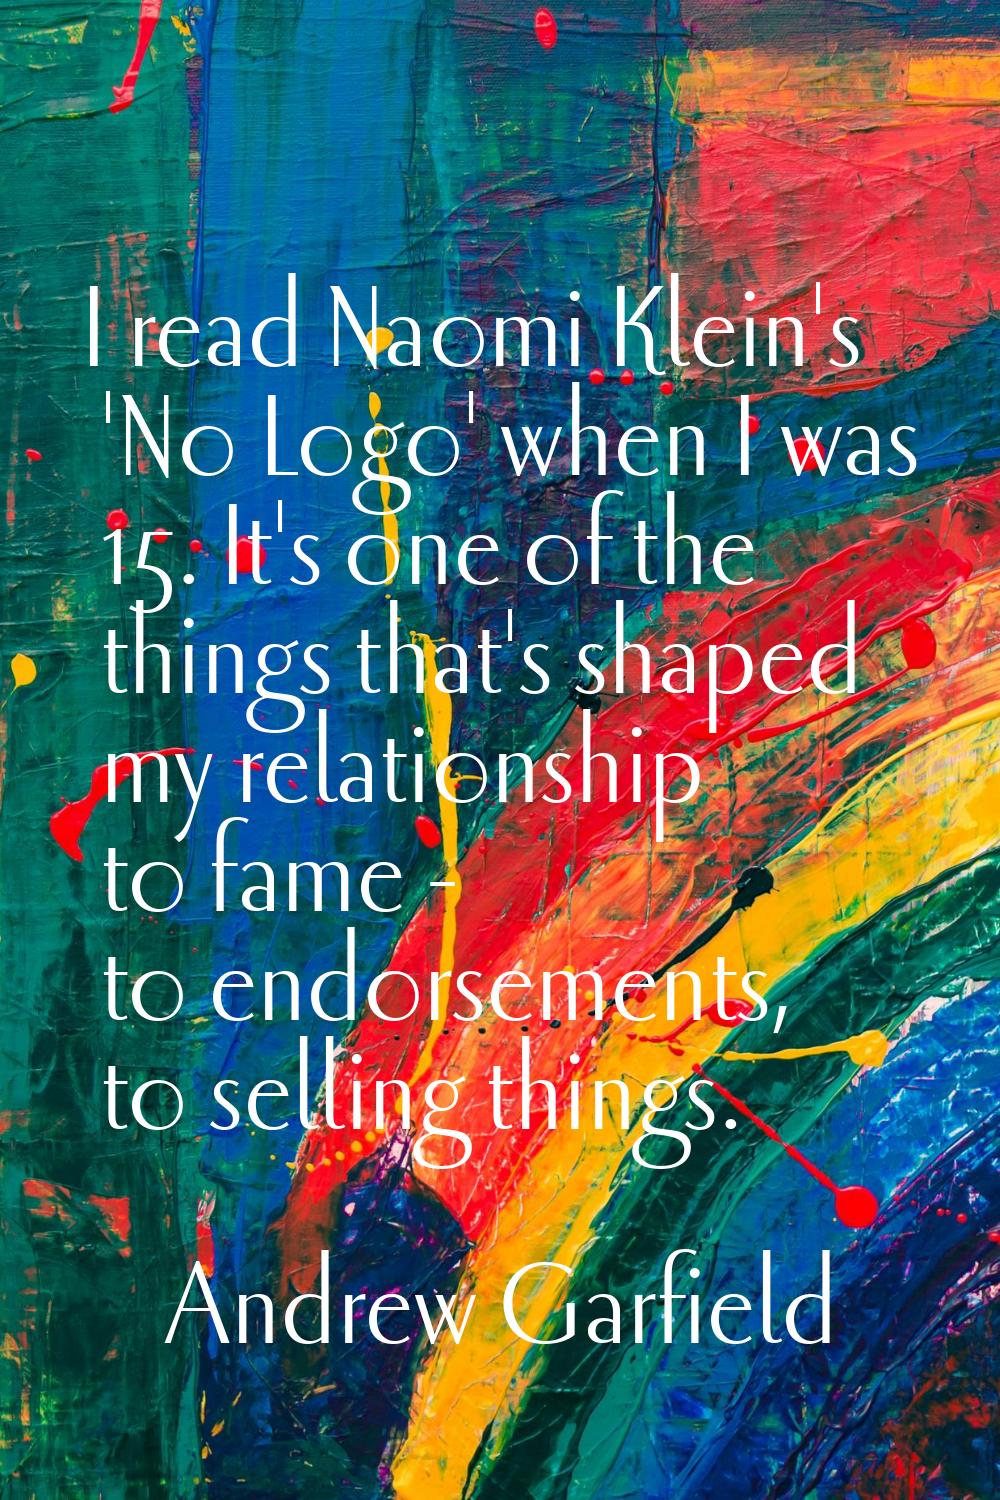 I read Naomi Klein's 'No Logo' when I was 15. It's one of the things that's shaped my relationship 